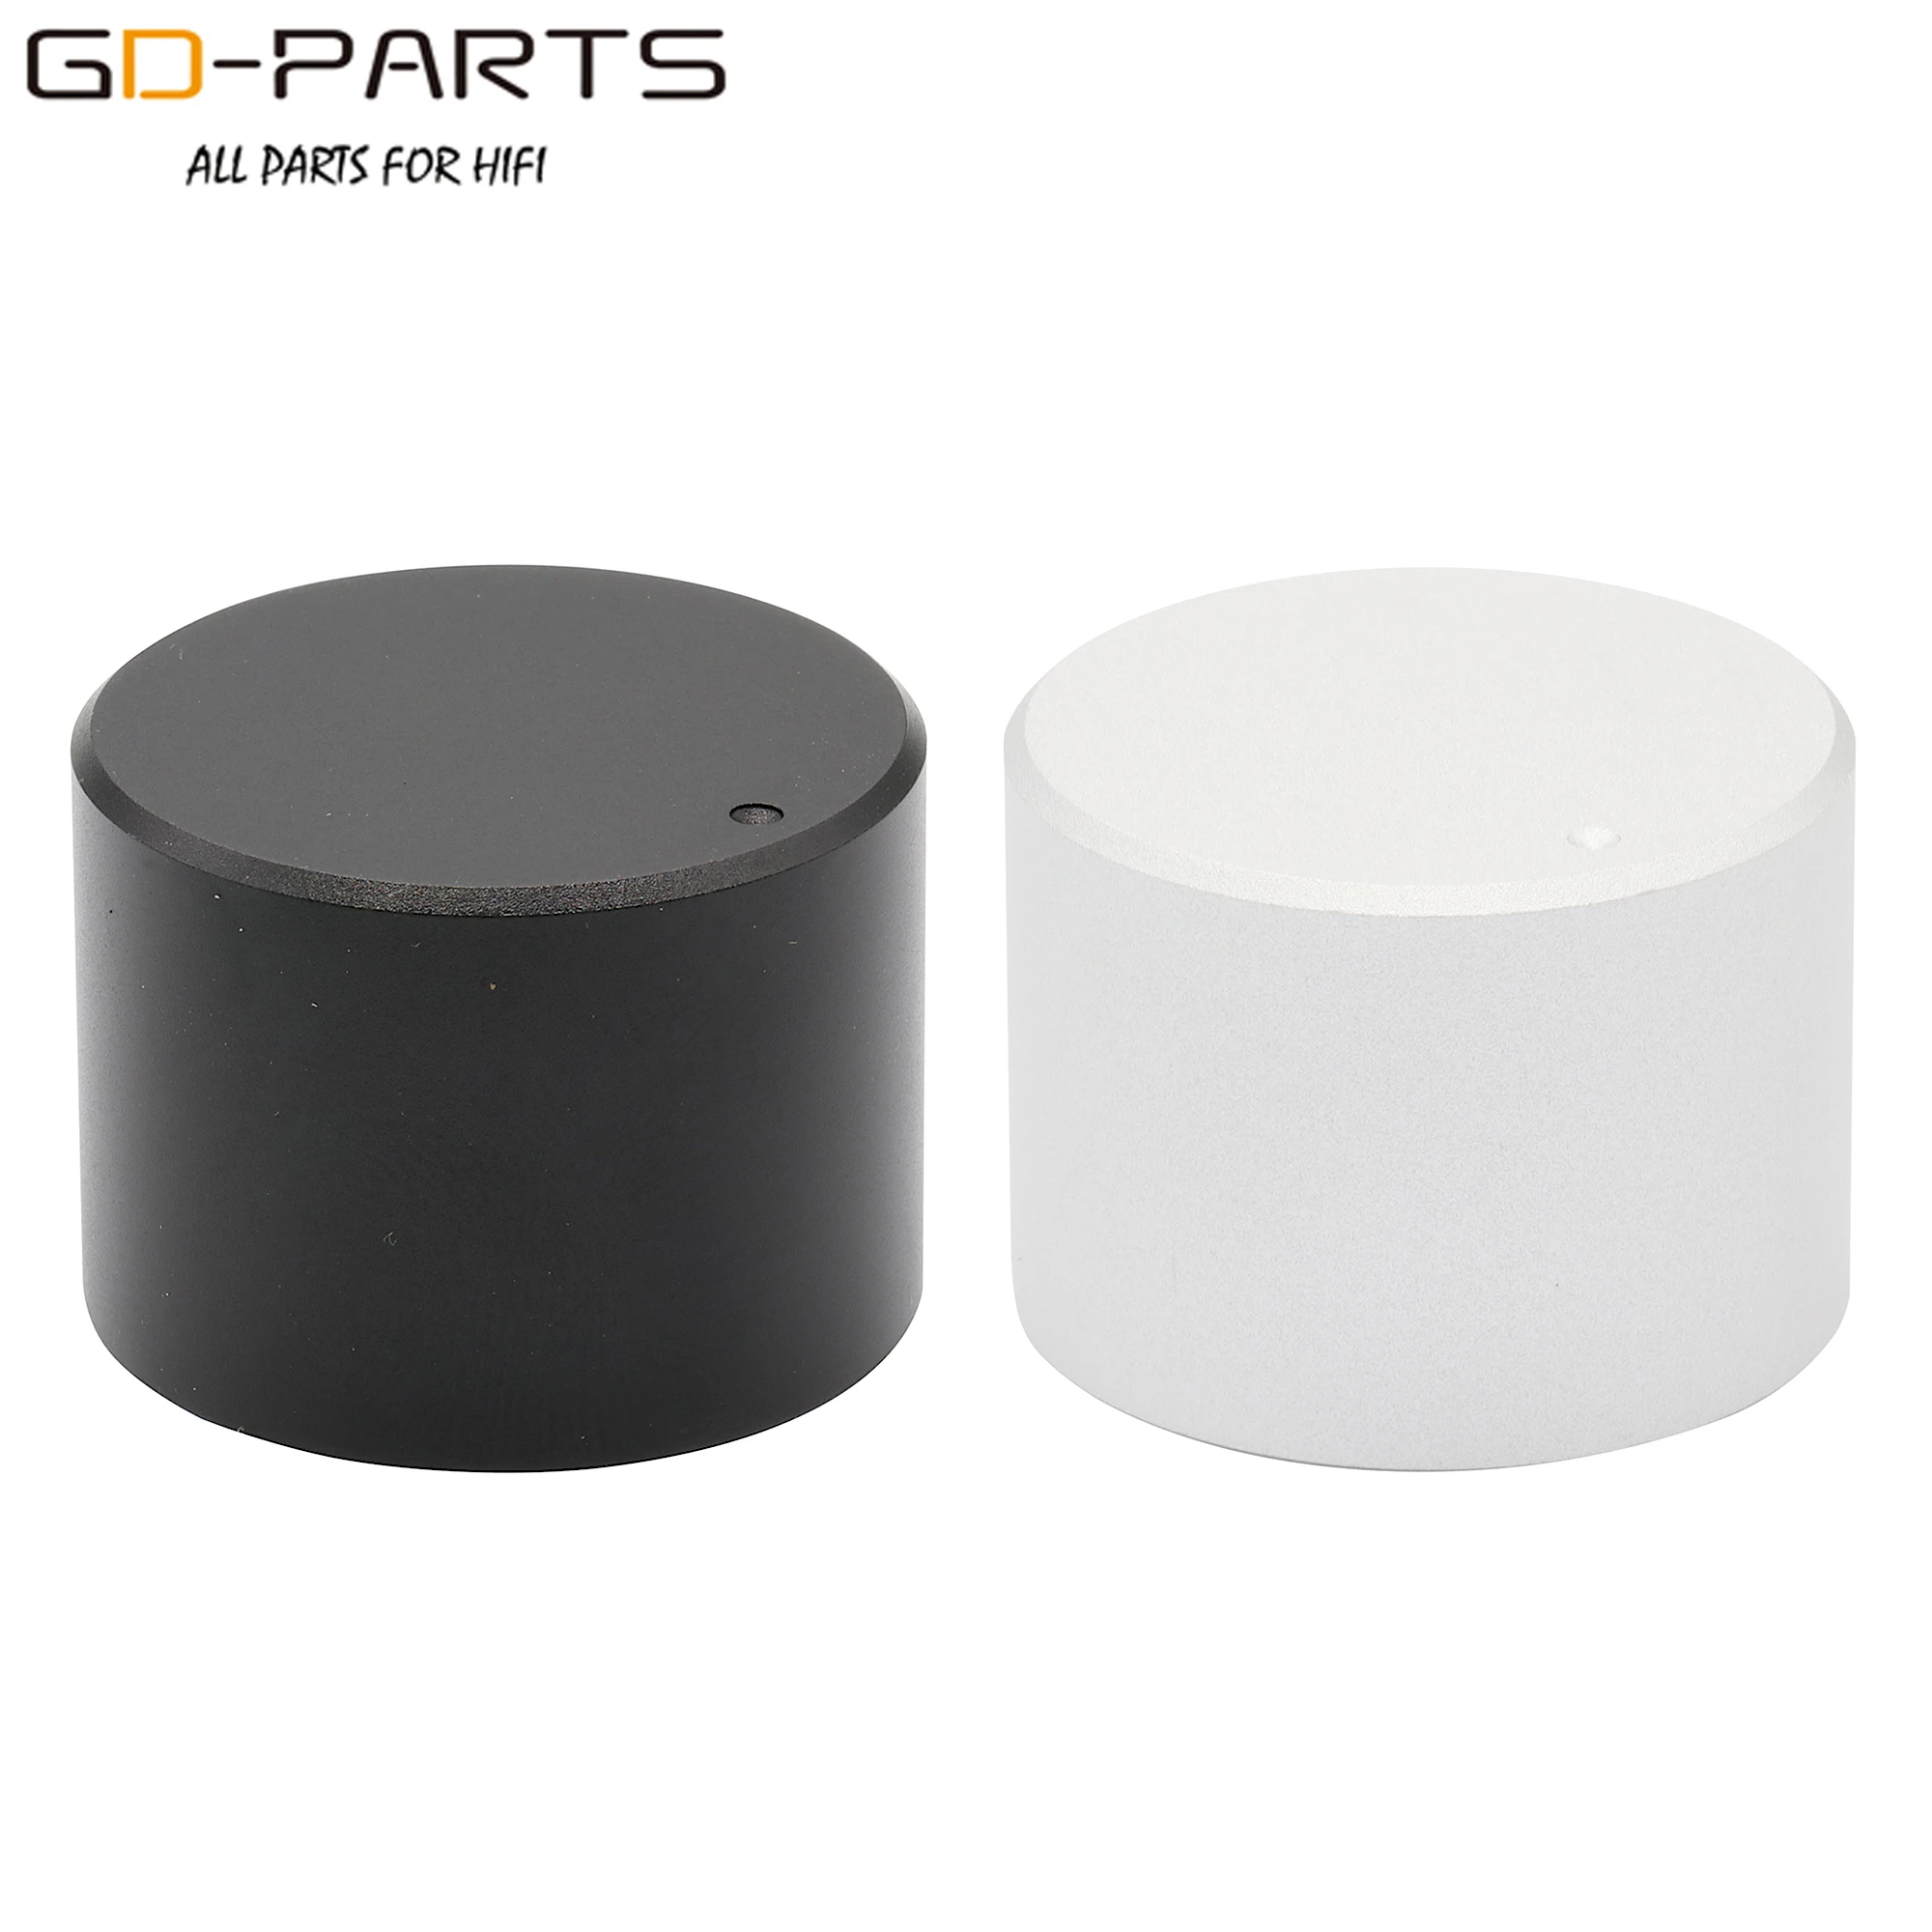 

30mm*22mm Machined Solid Aluminum Pointer Knob For CD DAC Turntable Radio Guitar AMP Potentiometer Sound Control Selector